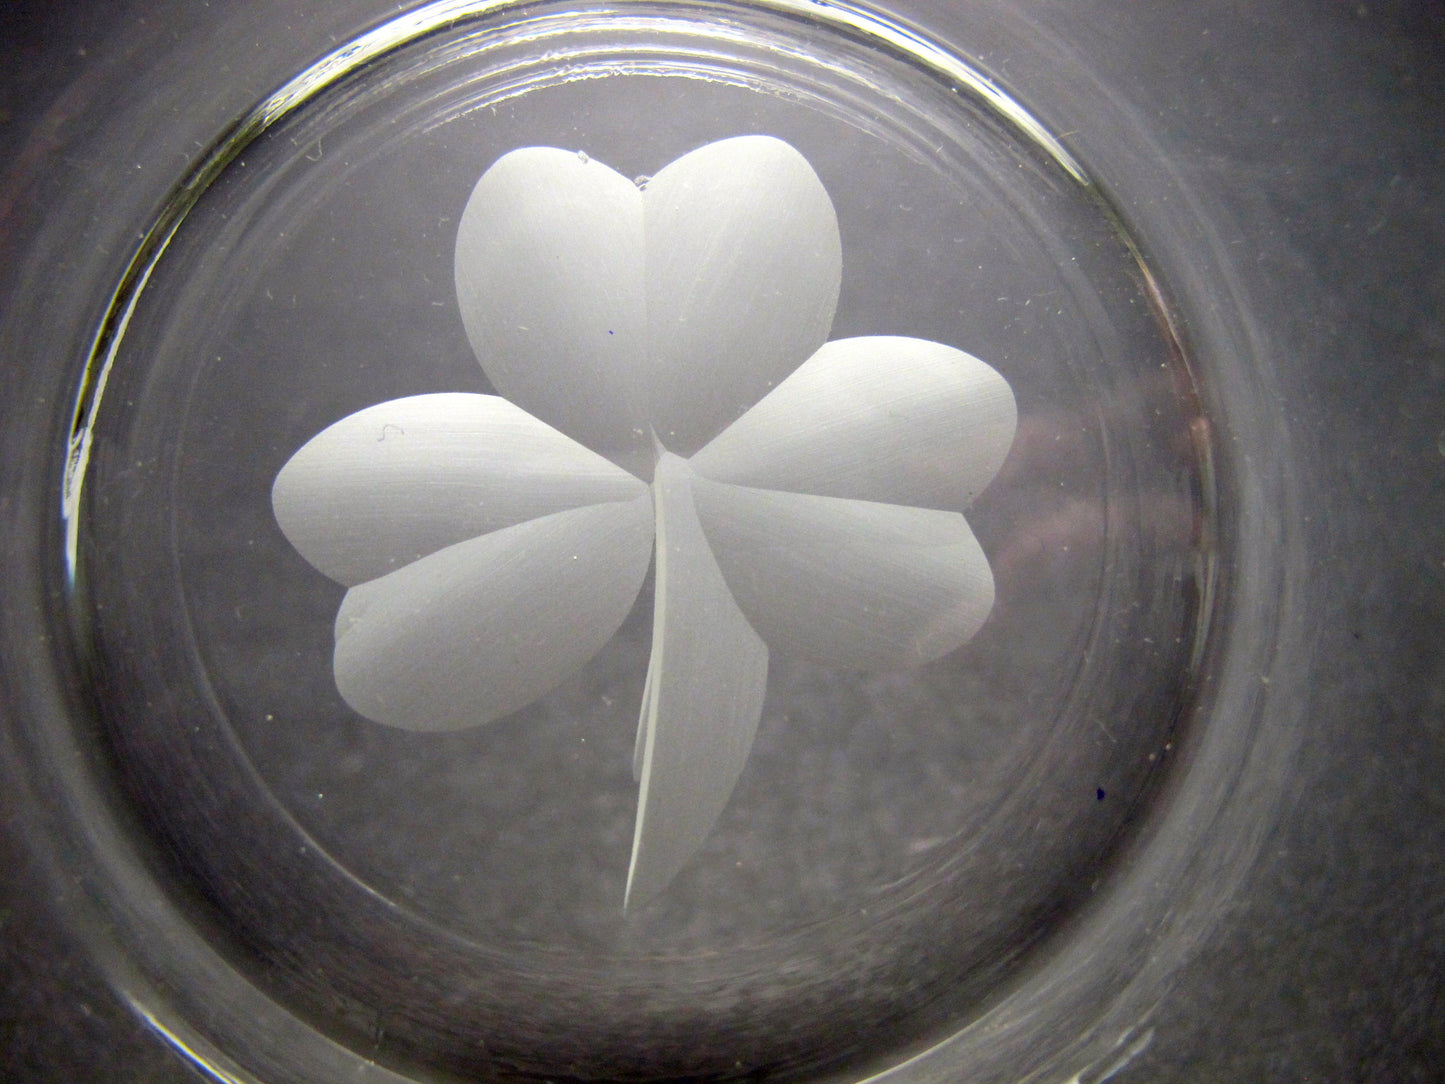 Hand cut glass celtic and shamrock sm. bowl - O'Rourke crystal awards & gifts abp cut glass